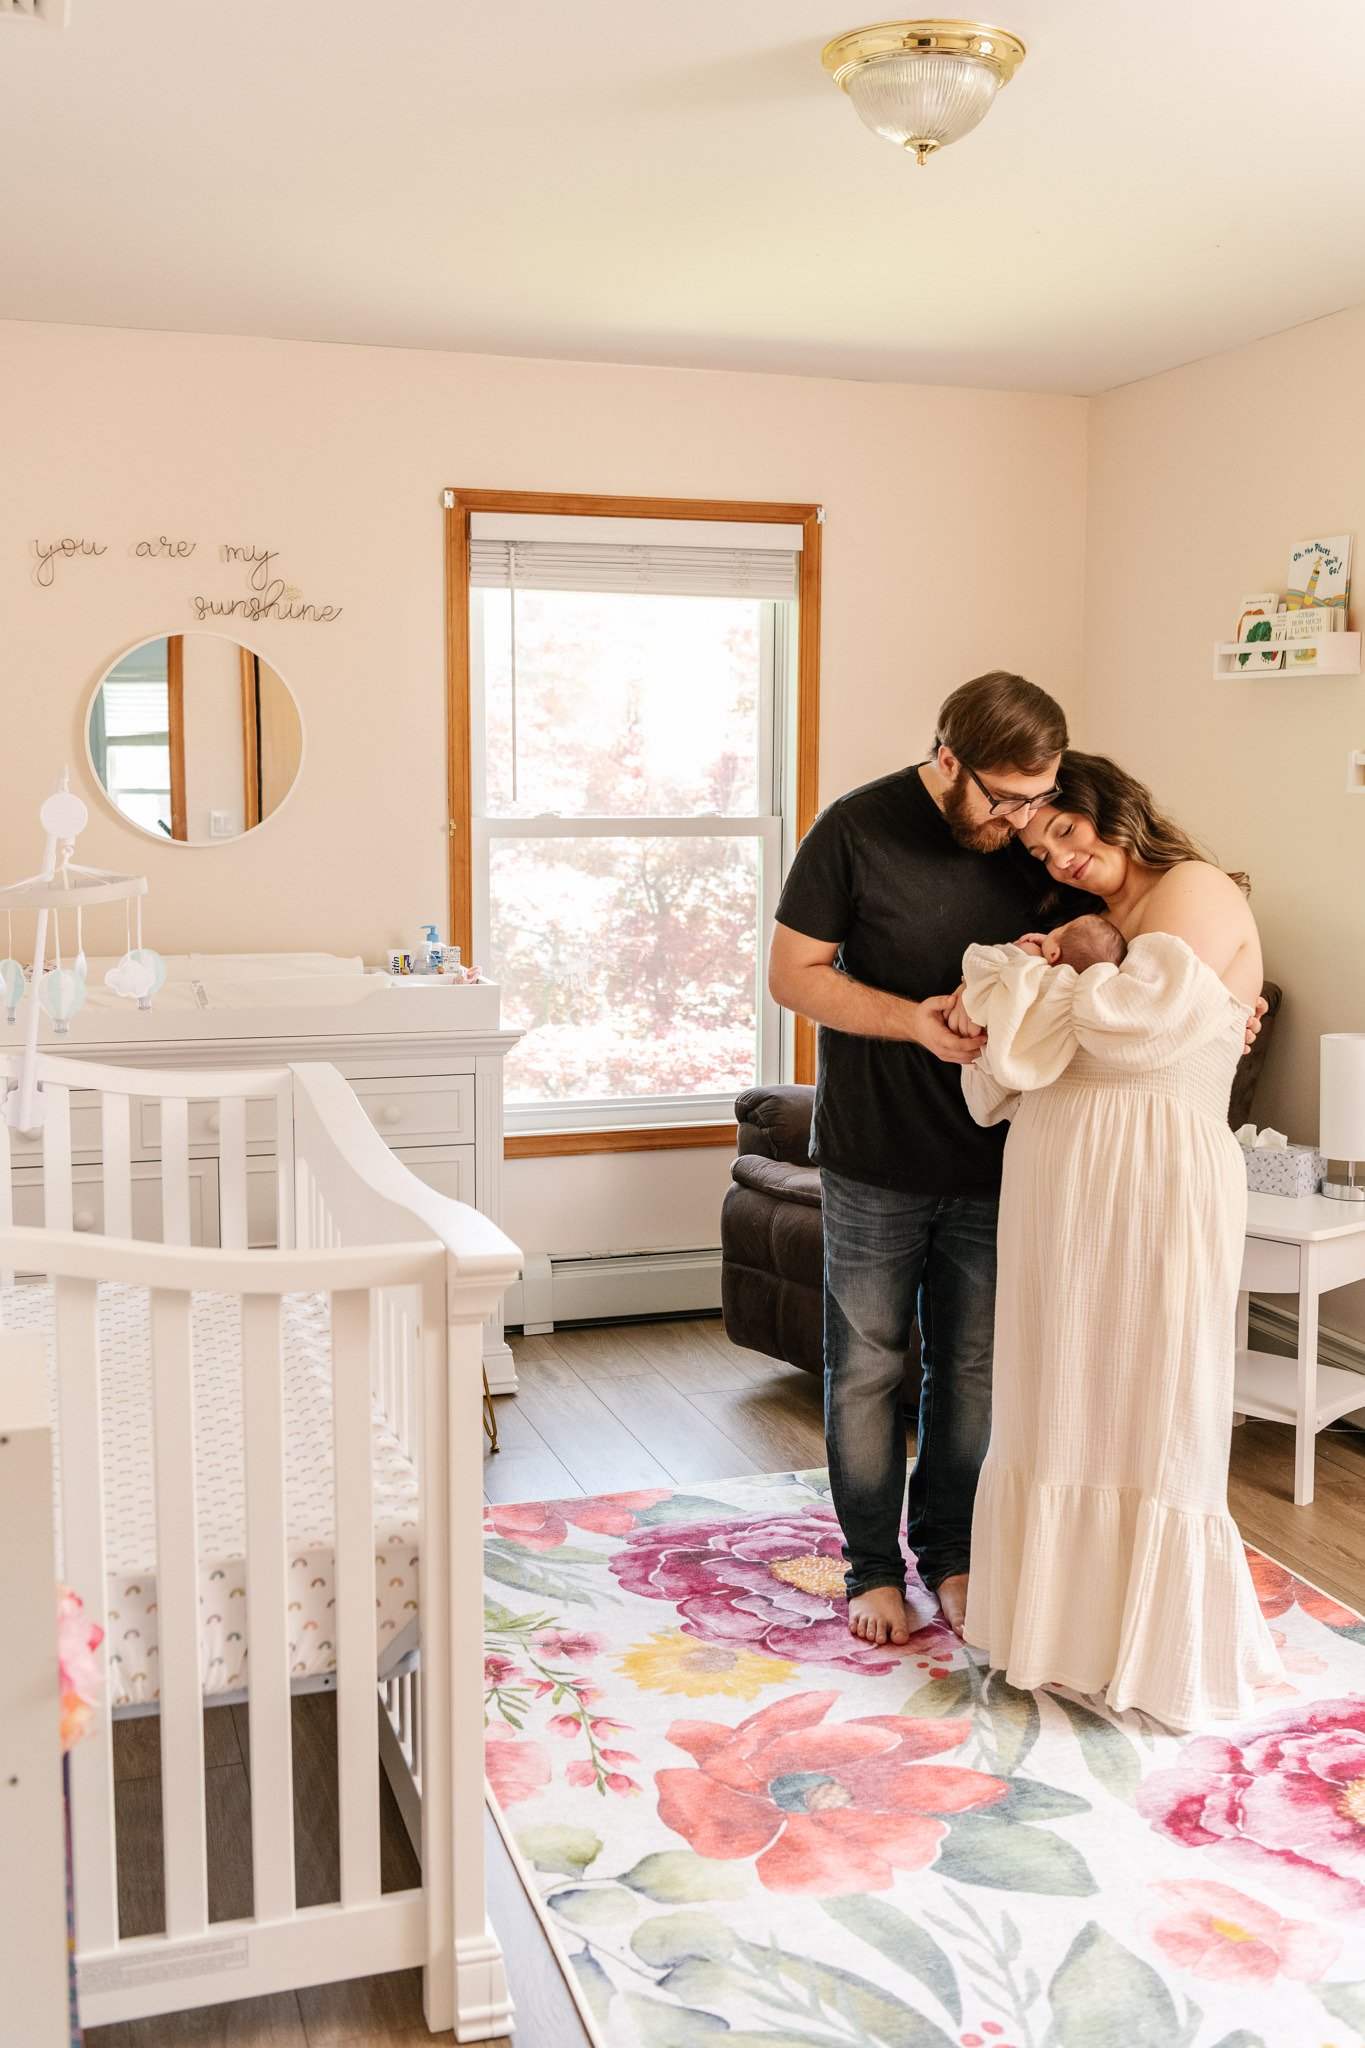  An intimate family moment is captured with new parents and babies in a little girl’s nursery by Nicole Hawkins Photography. candid newborn portraits tender family portrait with baby #NicoleHawkinsPhotography #NicoleHawkinsNewborns #Babygirl #inhomen